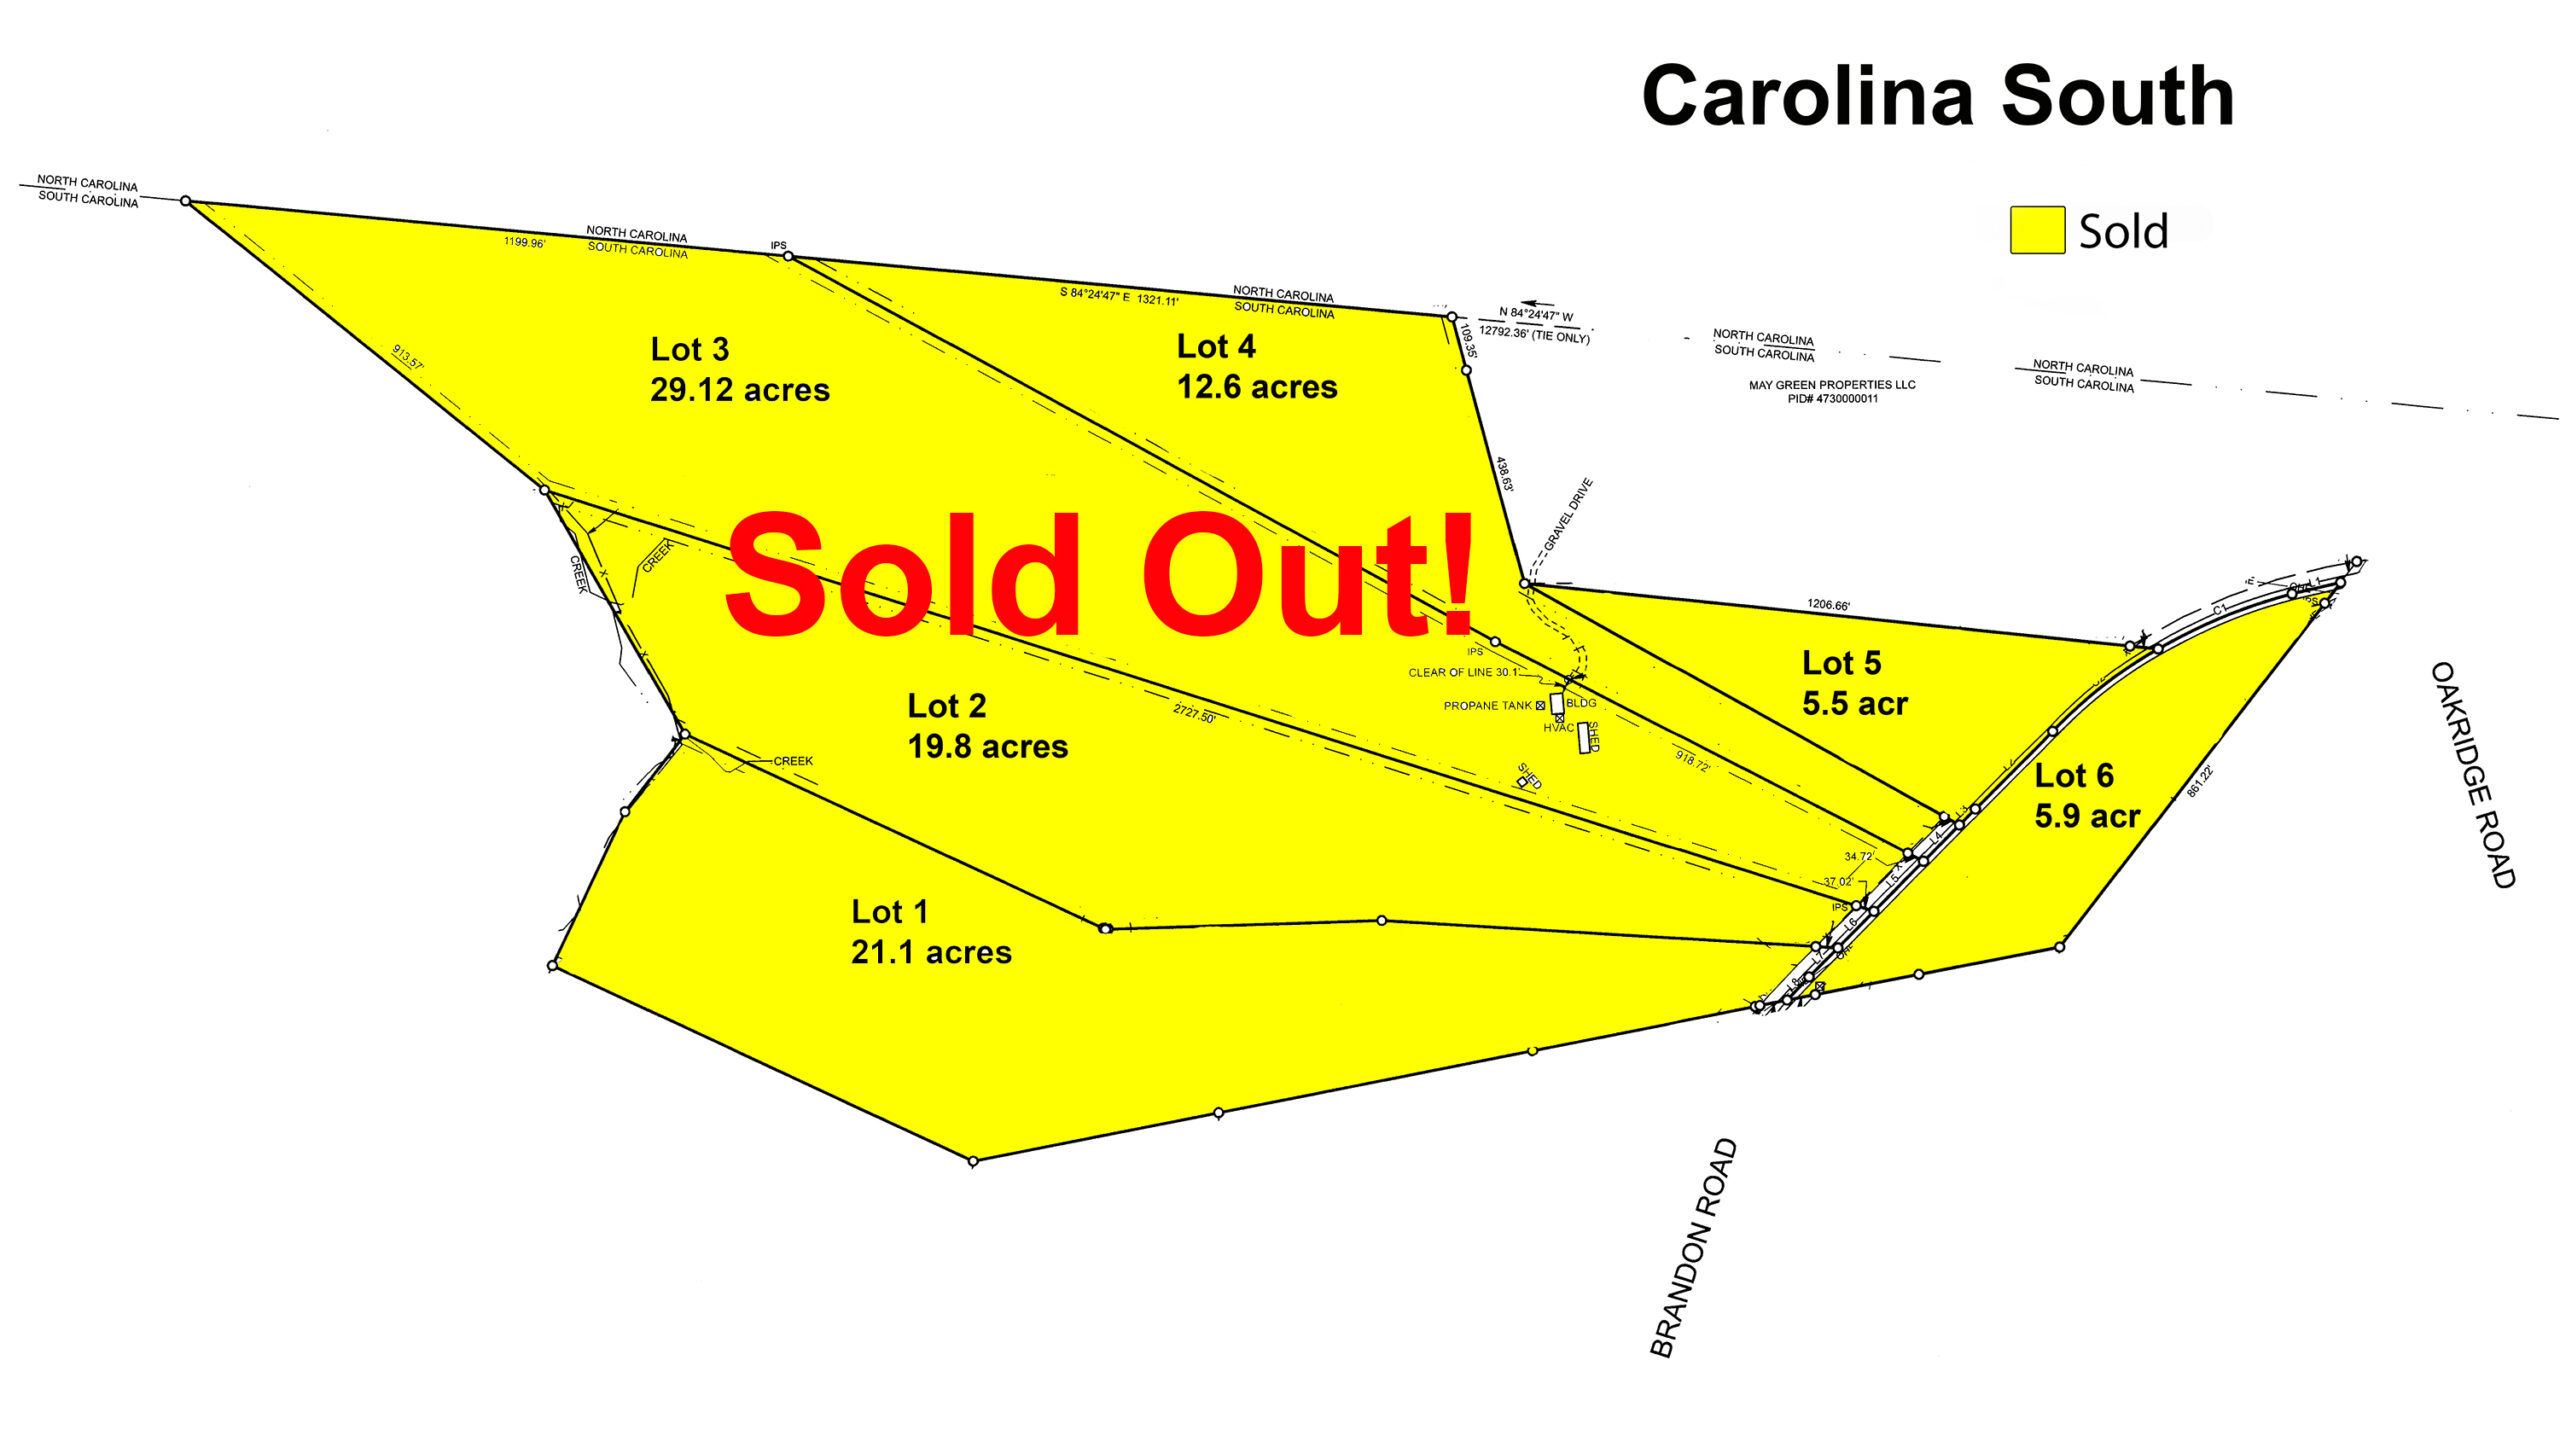 Carolina South Recorded Plat 1 - sold out